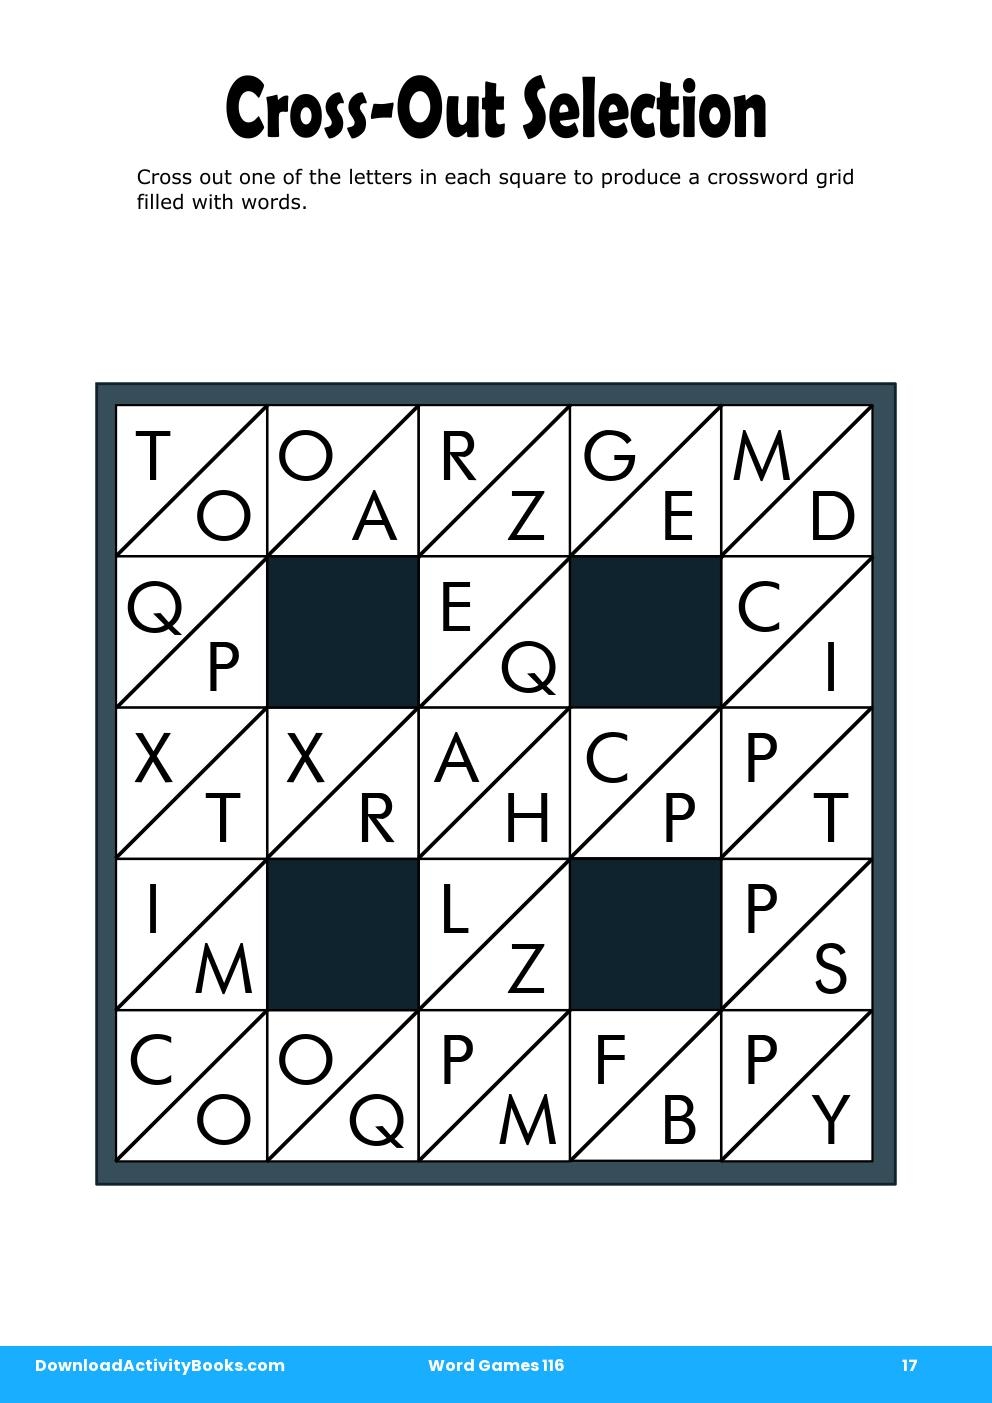 Cross-Out Selection in Word Games 116